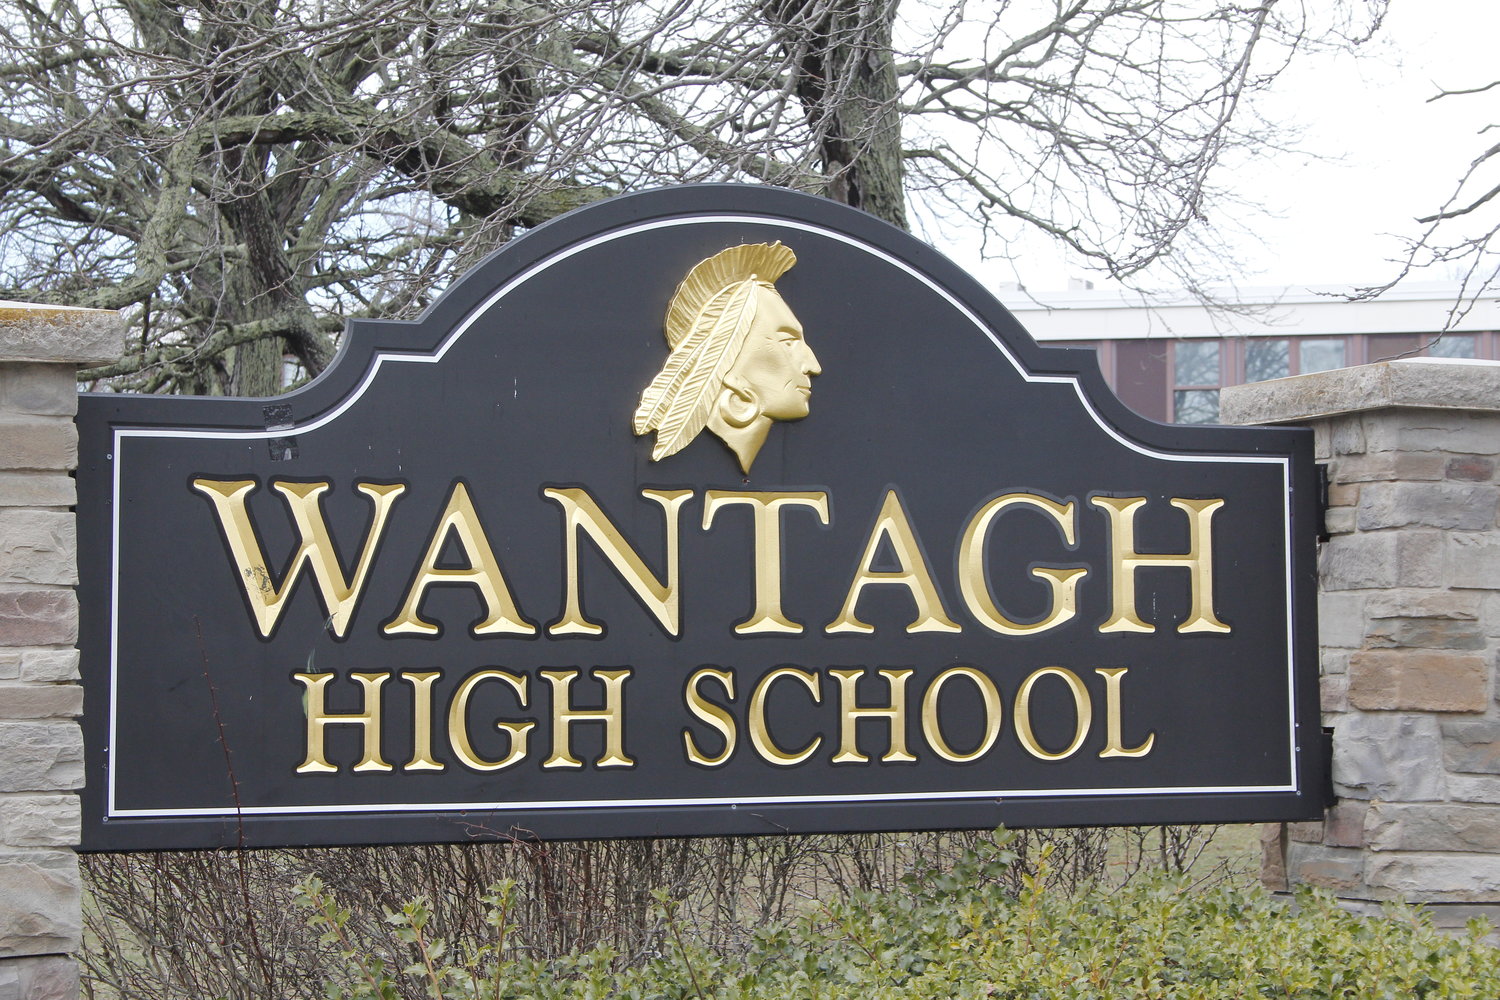 The Wantagh School District budget failed on May 18. The Board of Education will put the spending plan up for a revote June 15.